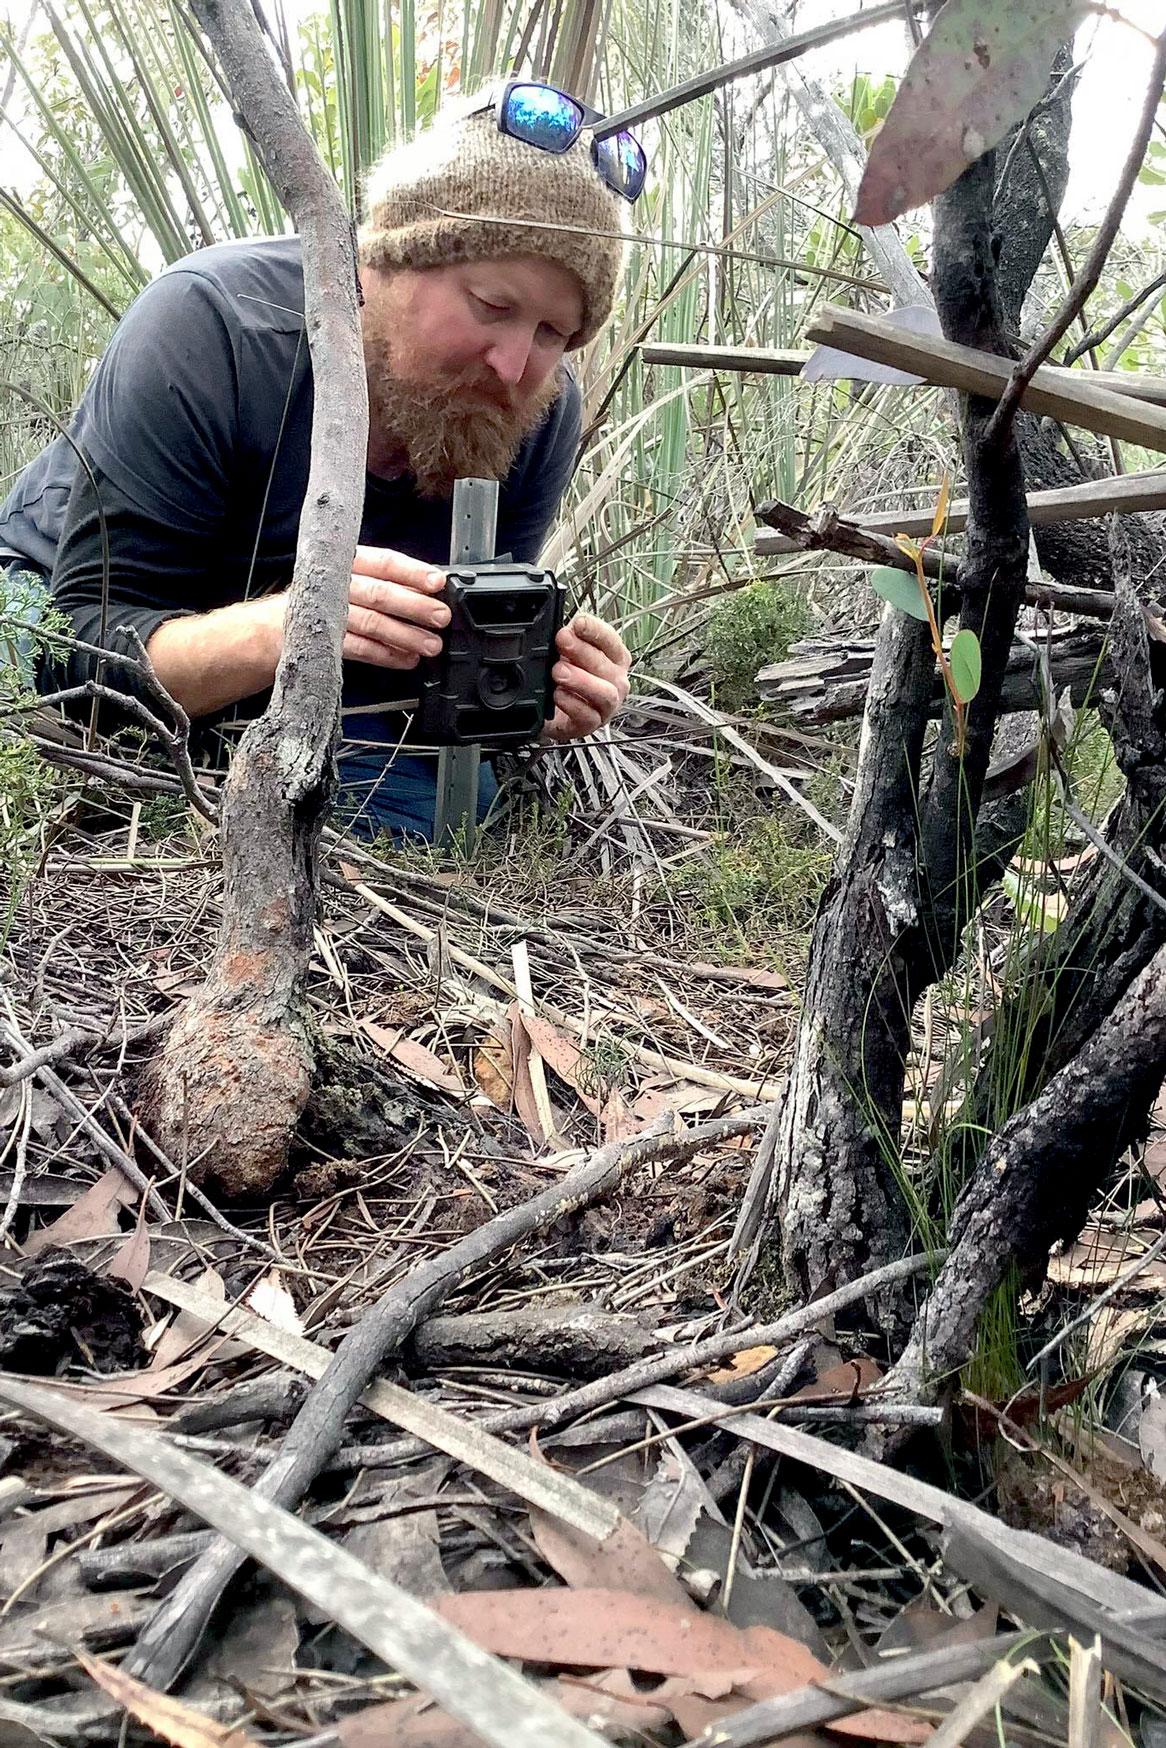 Pat Hodgens of Kangaroo Island Land for Wildlife sets a camera trap to monitor the recovery of the endangered Kangaroo Island dunnart (credit: Kangaroo Island Land for Wildlife)